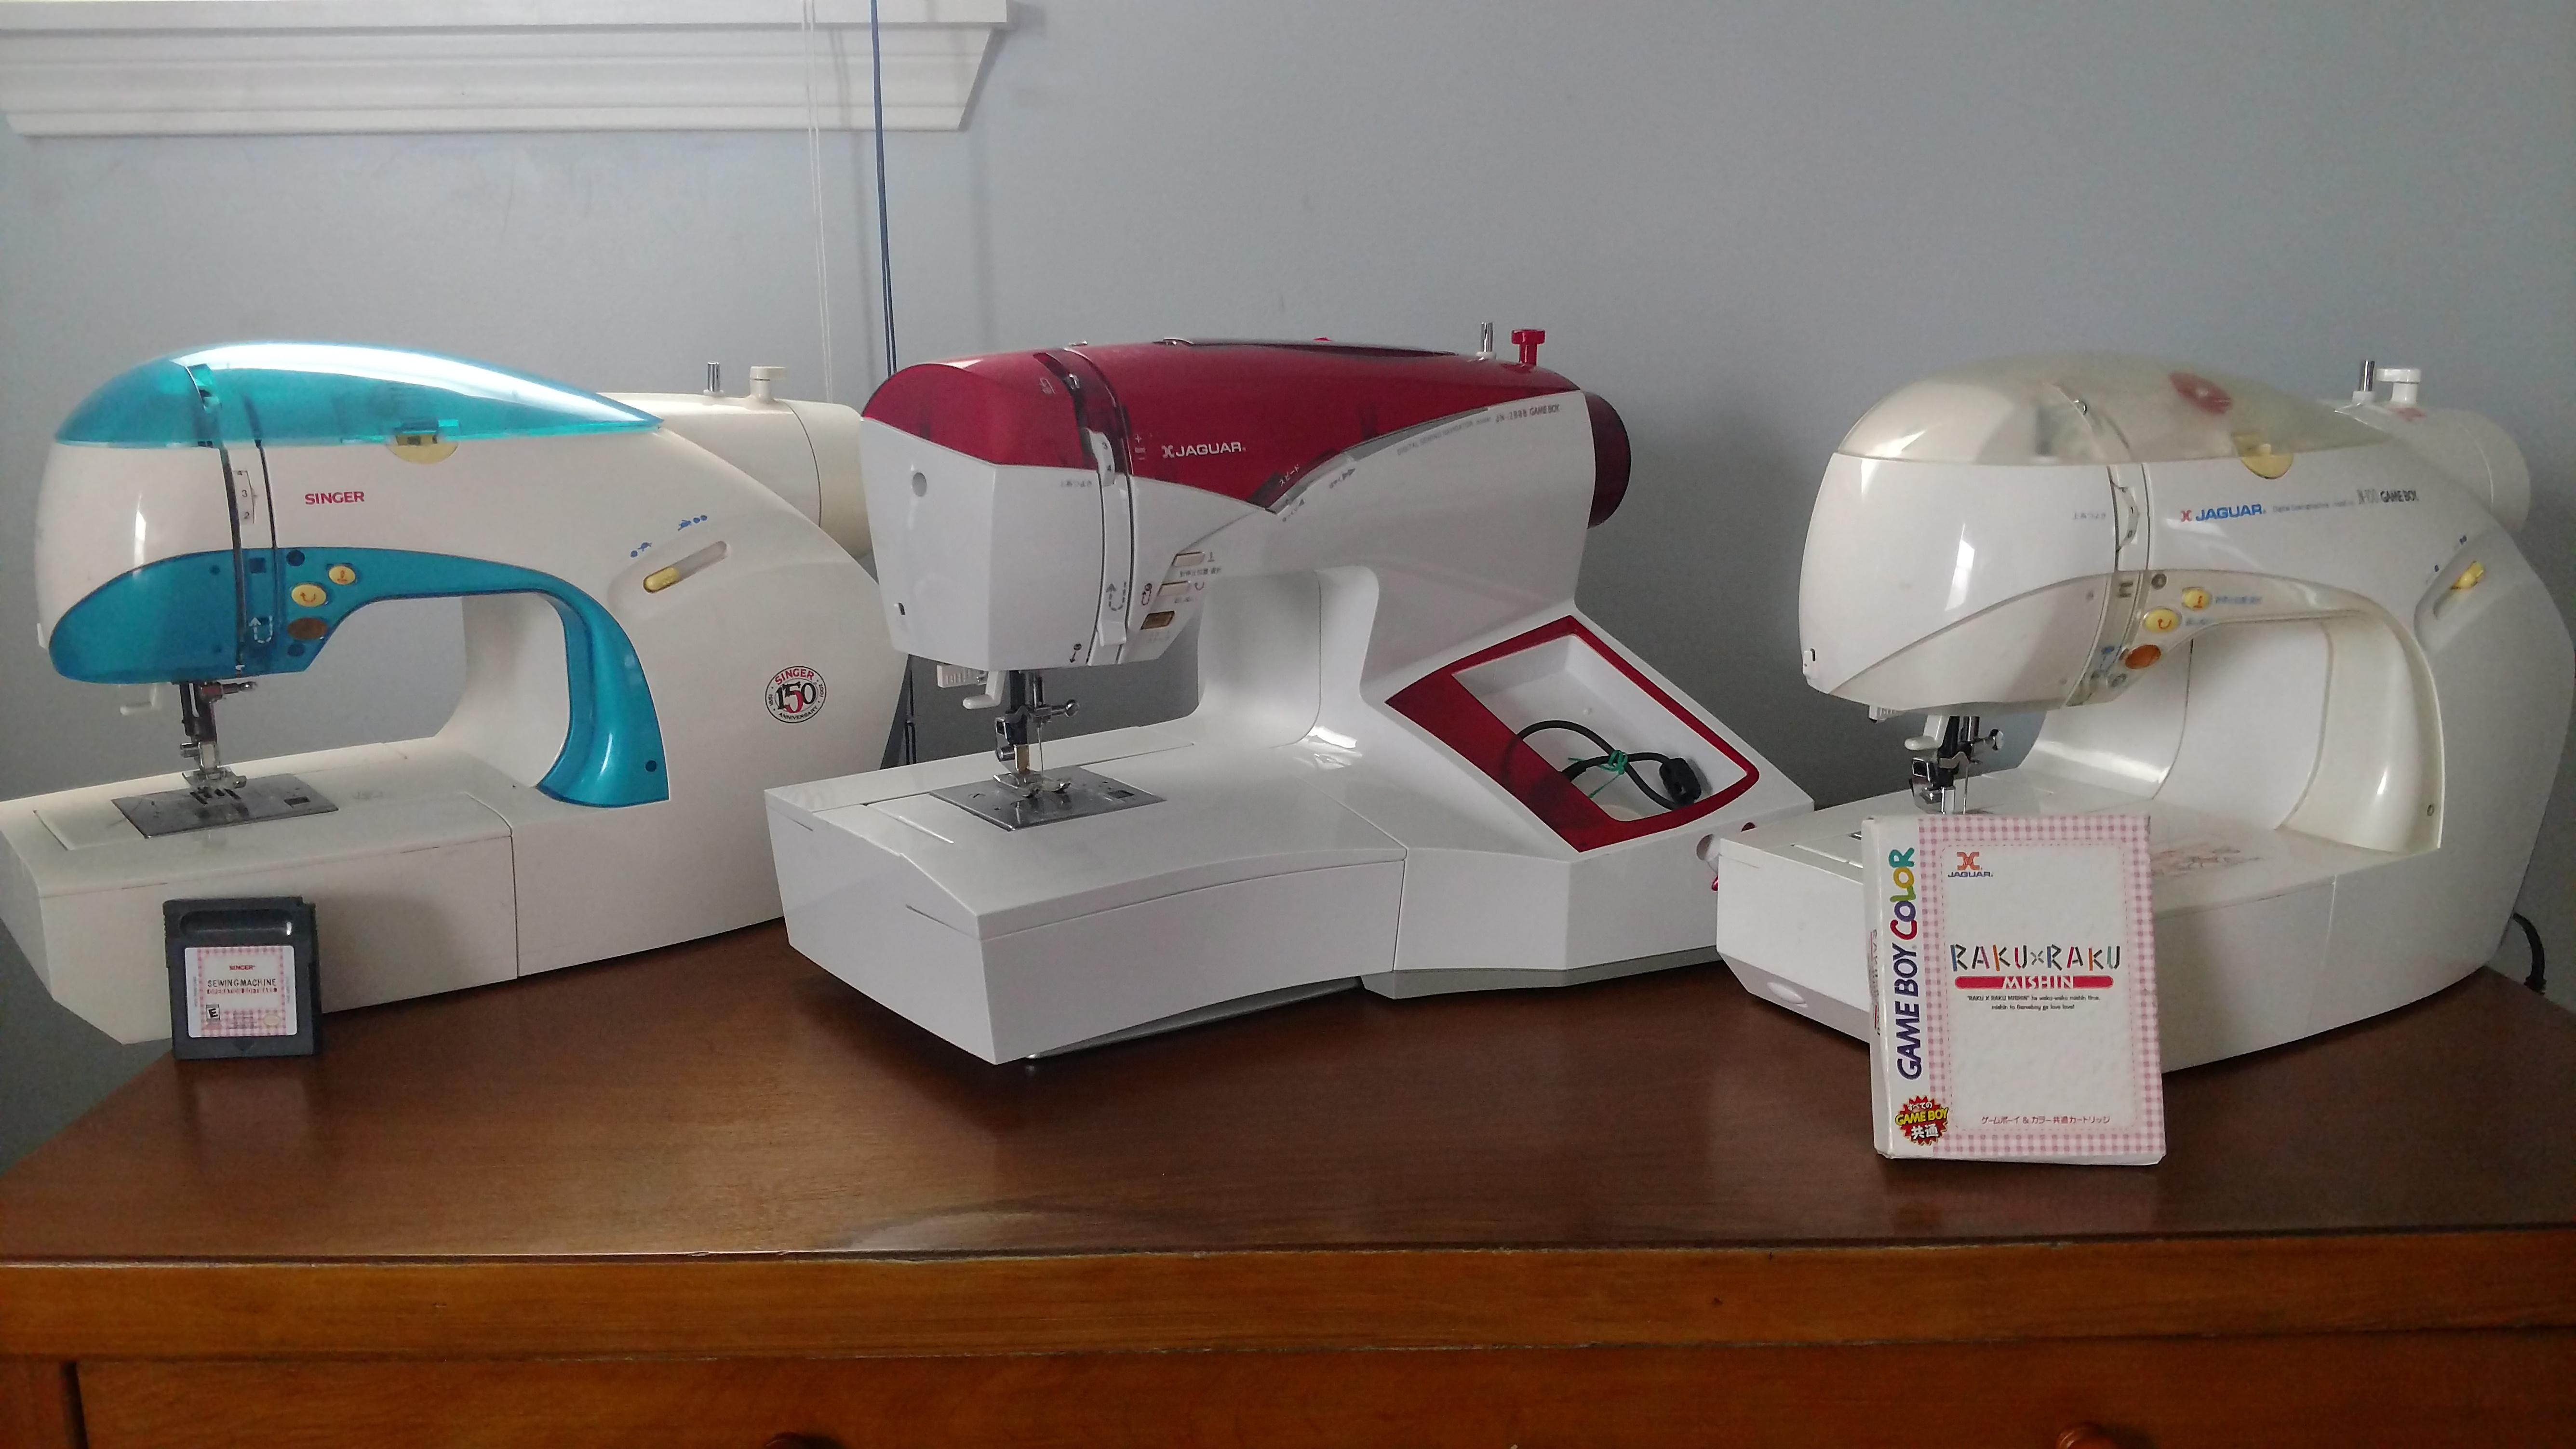 male pattern boldness: Toy Sewing Machines for Children -- Yea or Nay?